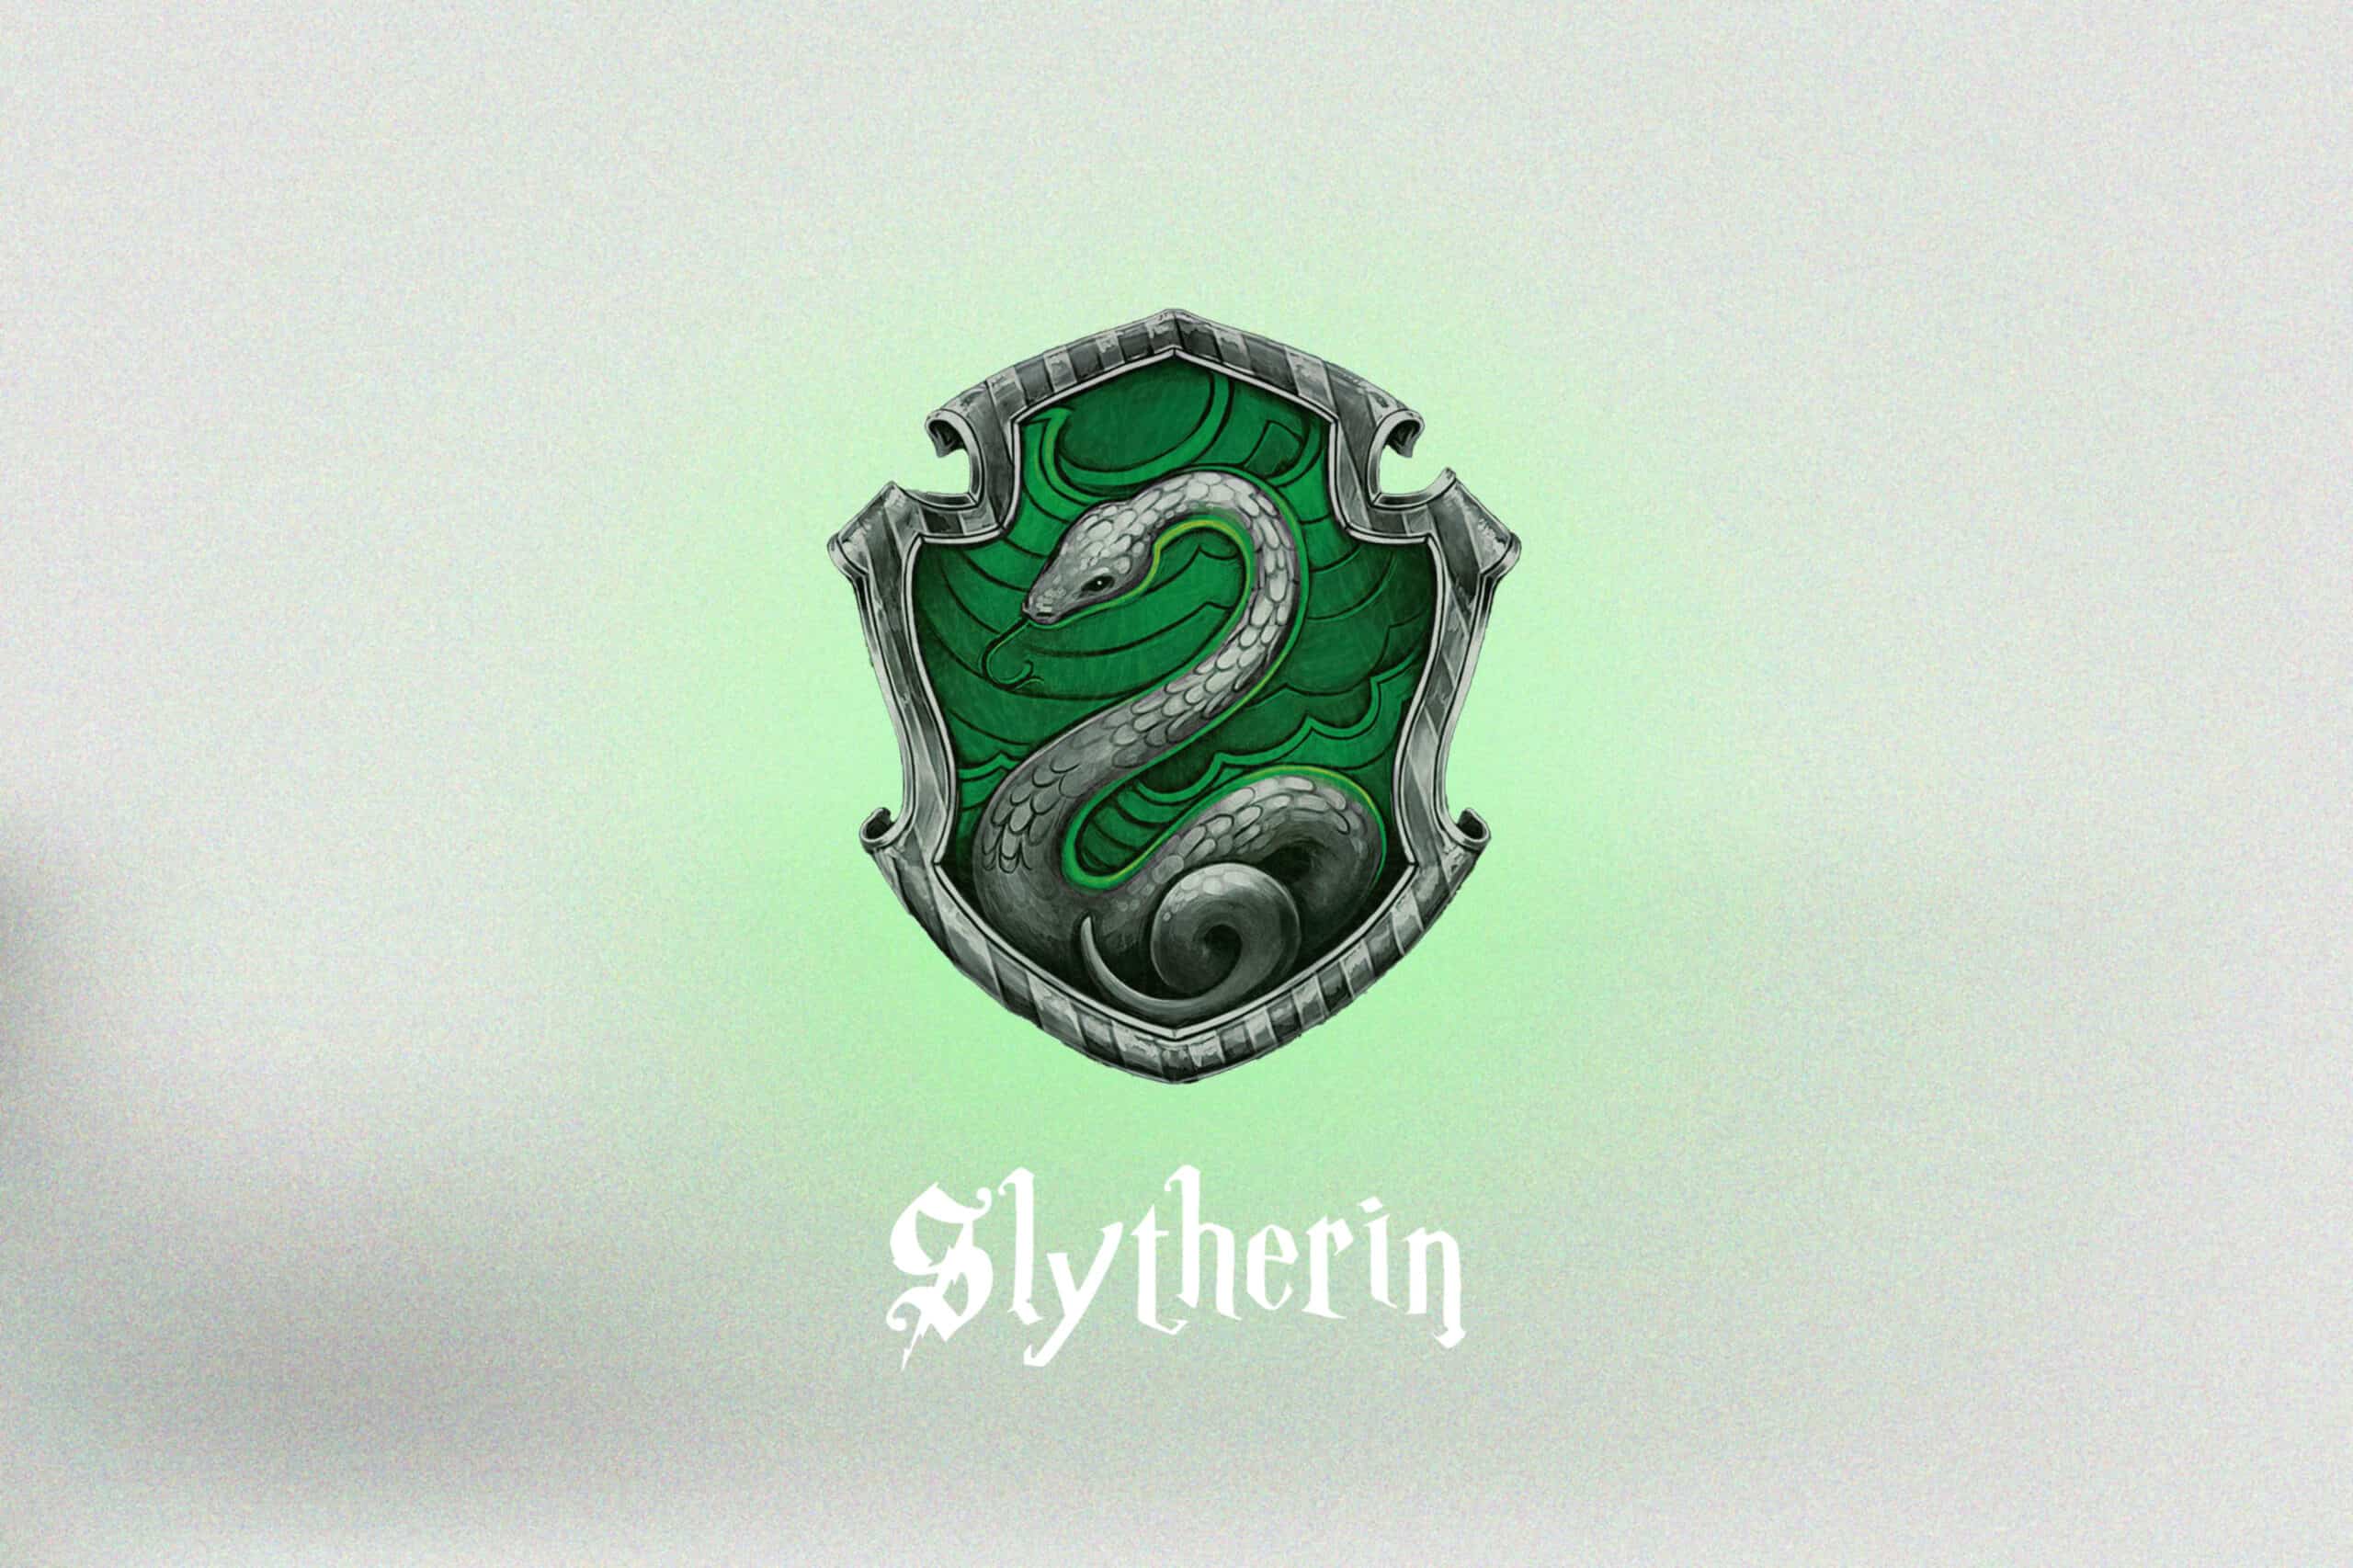 Slytherin: More than Just the Villains